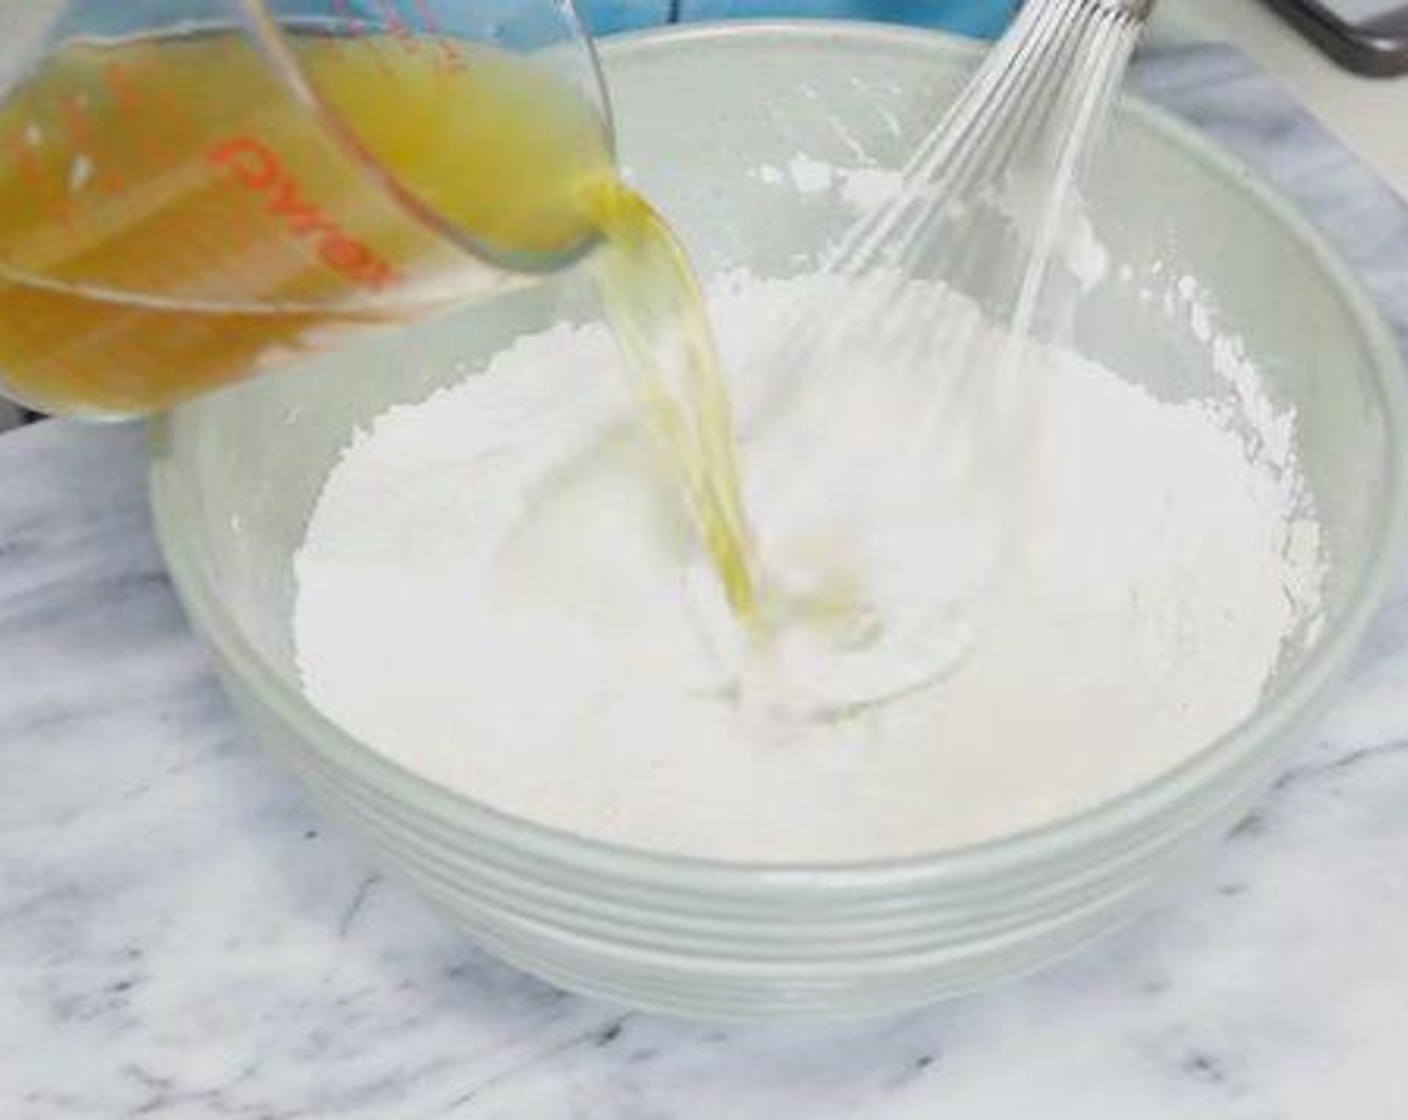 step 3 In a bowl, whisk together the All-Purpose Flour (2 cups), Baking Powder (1 Tbsp), Salt (2 Tbsp) and Corn Starch (2 Tbsp). Whisk in the Beer (2 cups) until the batter is completely smooth and free of any lumps. Refrigerate until ready to use.